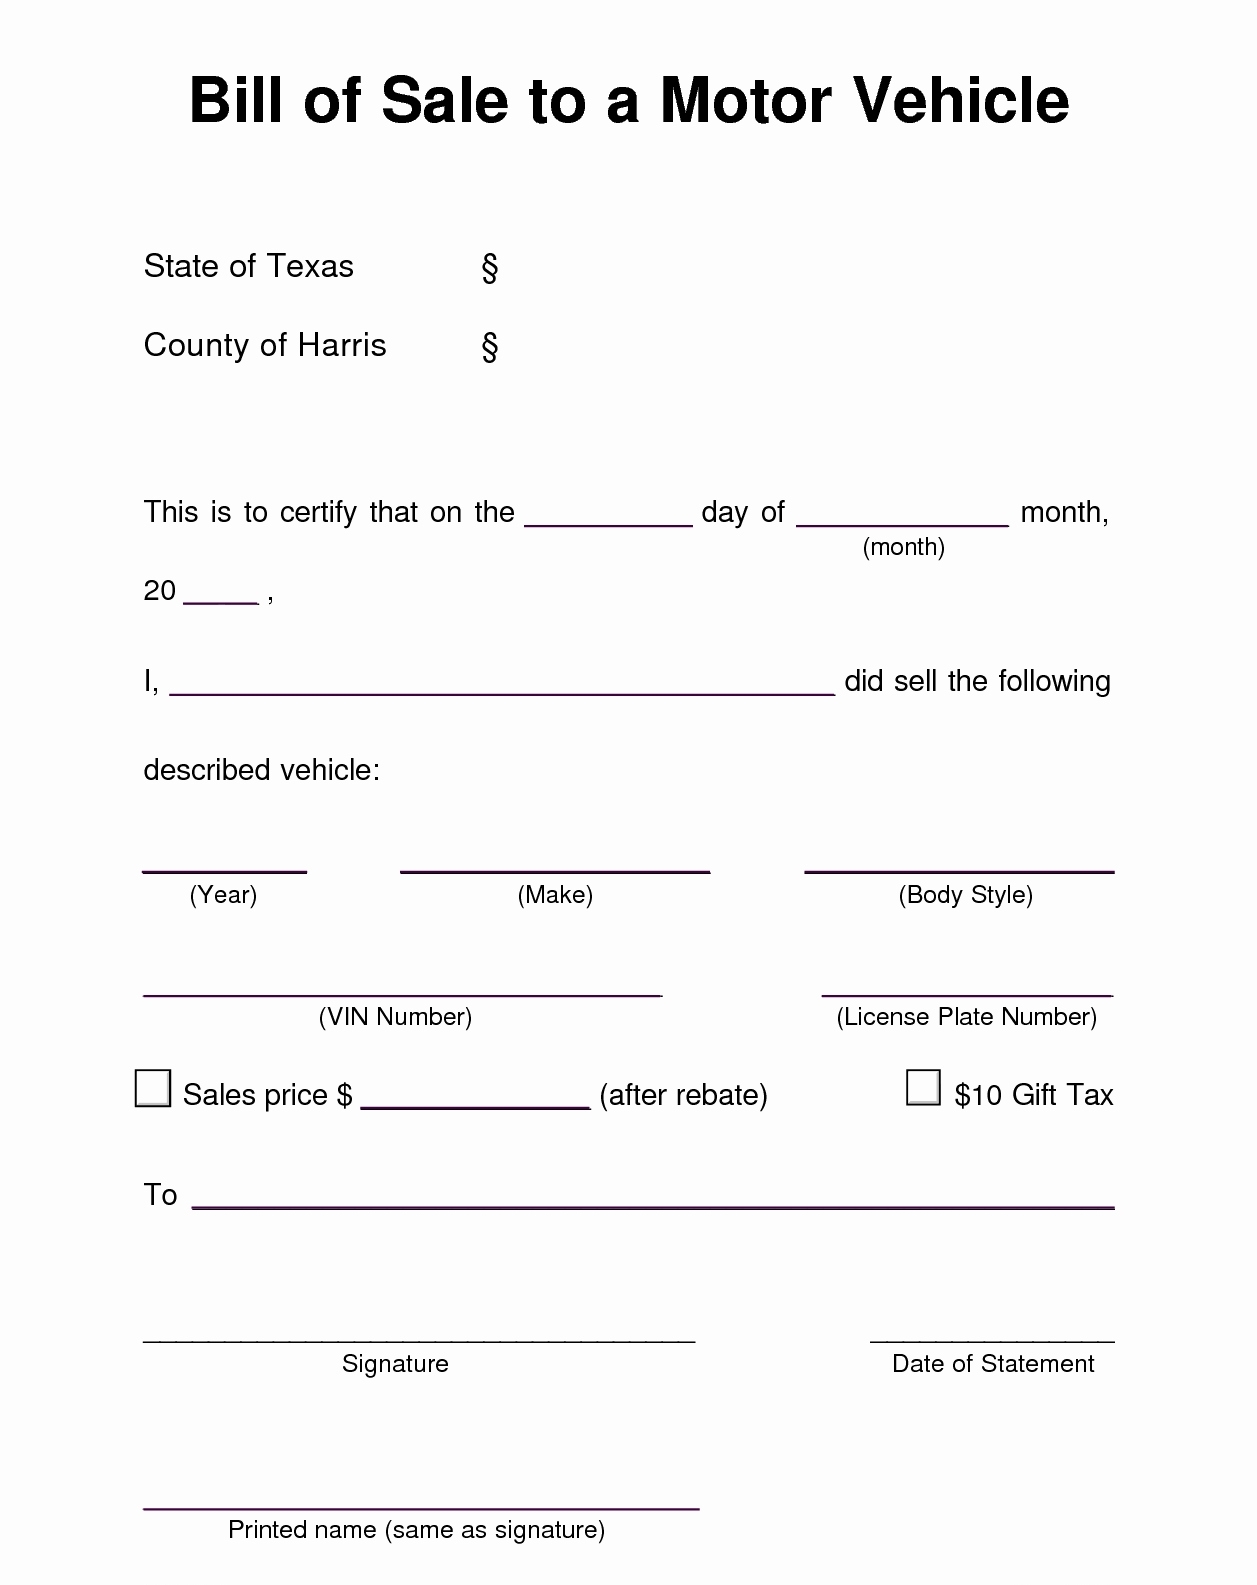 nc-vehicle-bill-of-sale-template